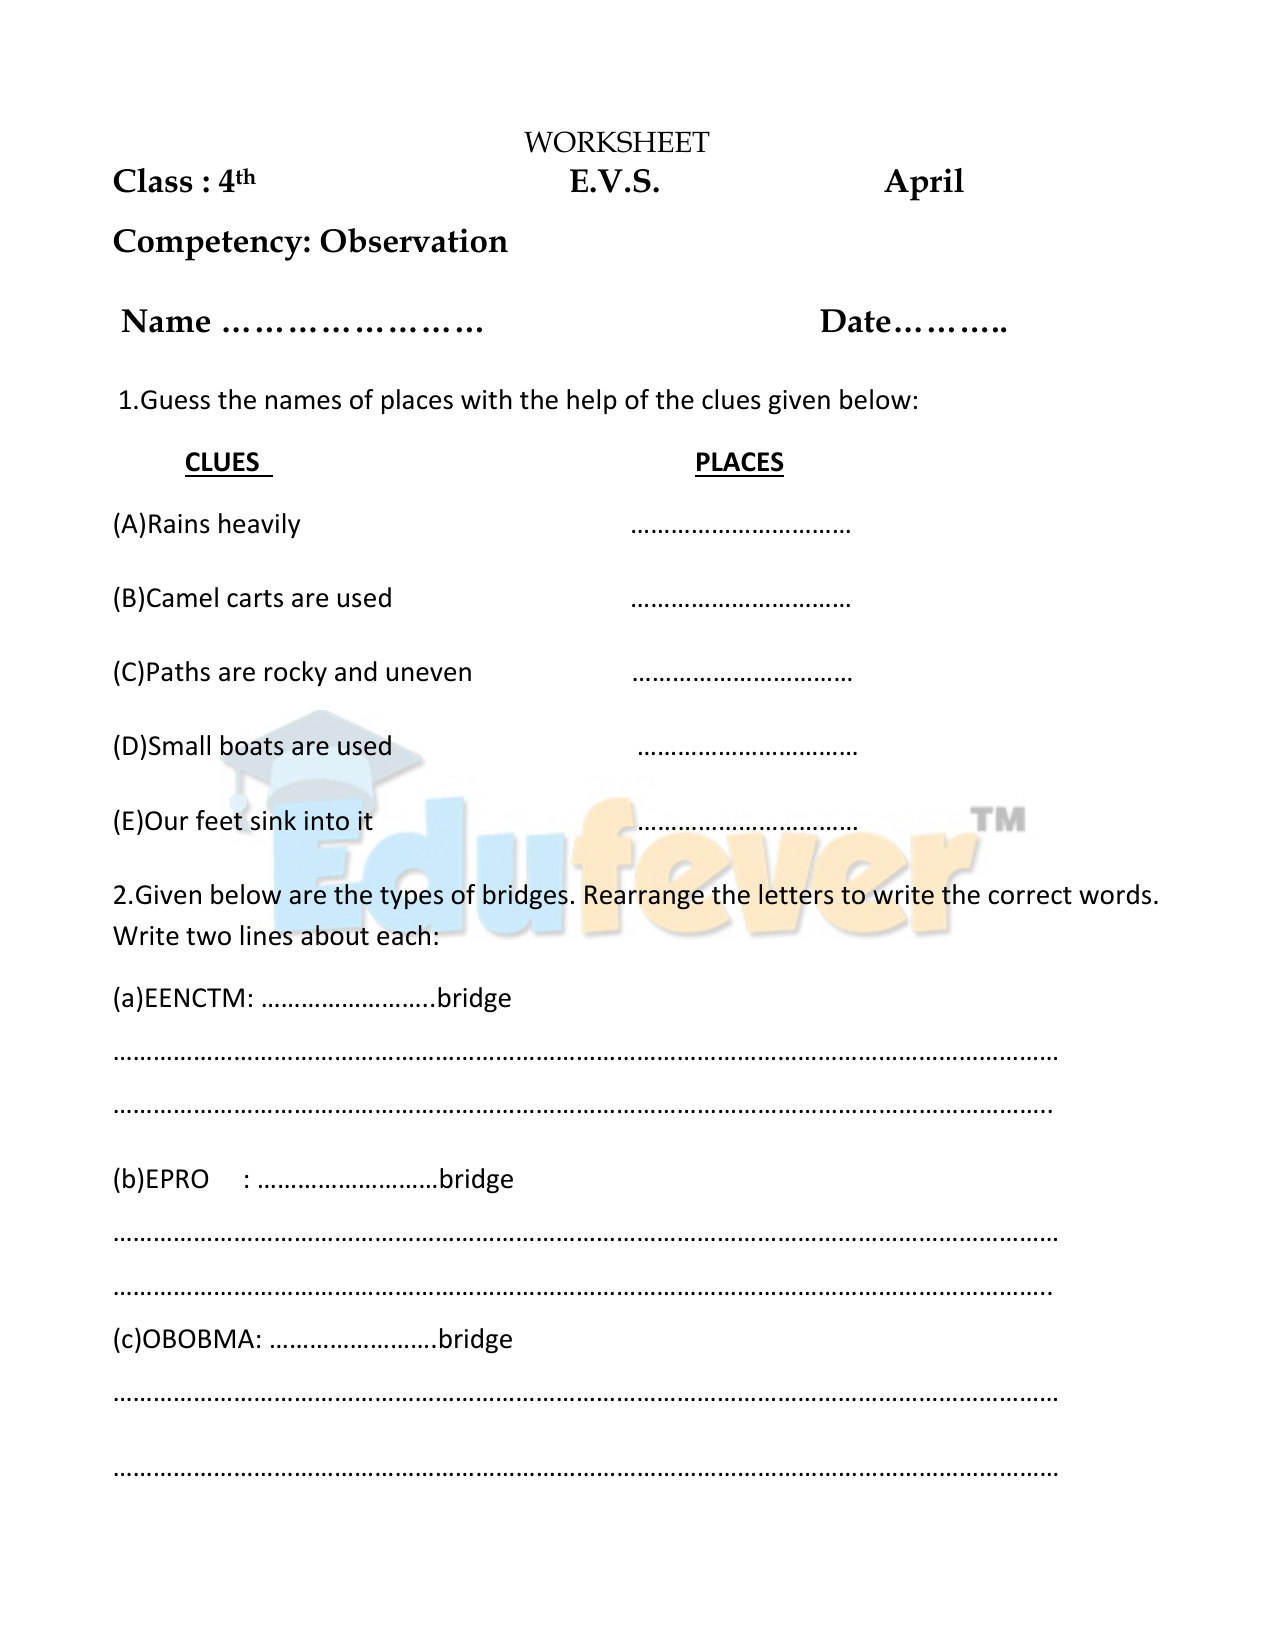 evs-worksheets-for-class-4-kv-people-like-wedding-ideas